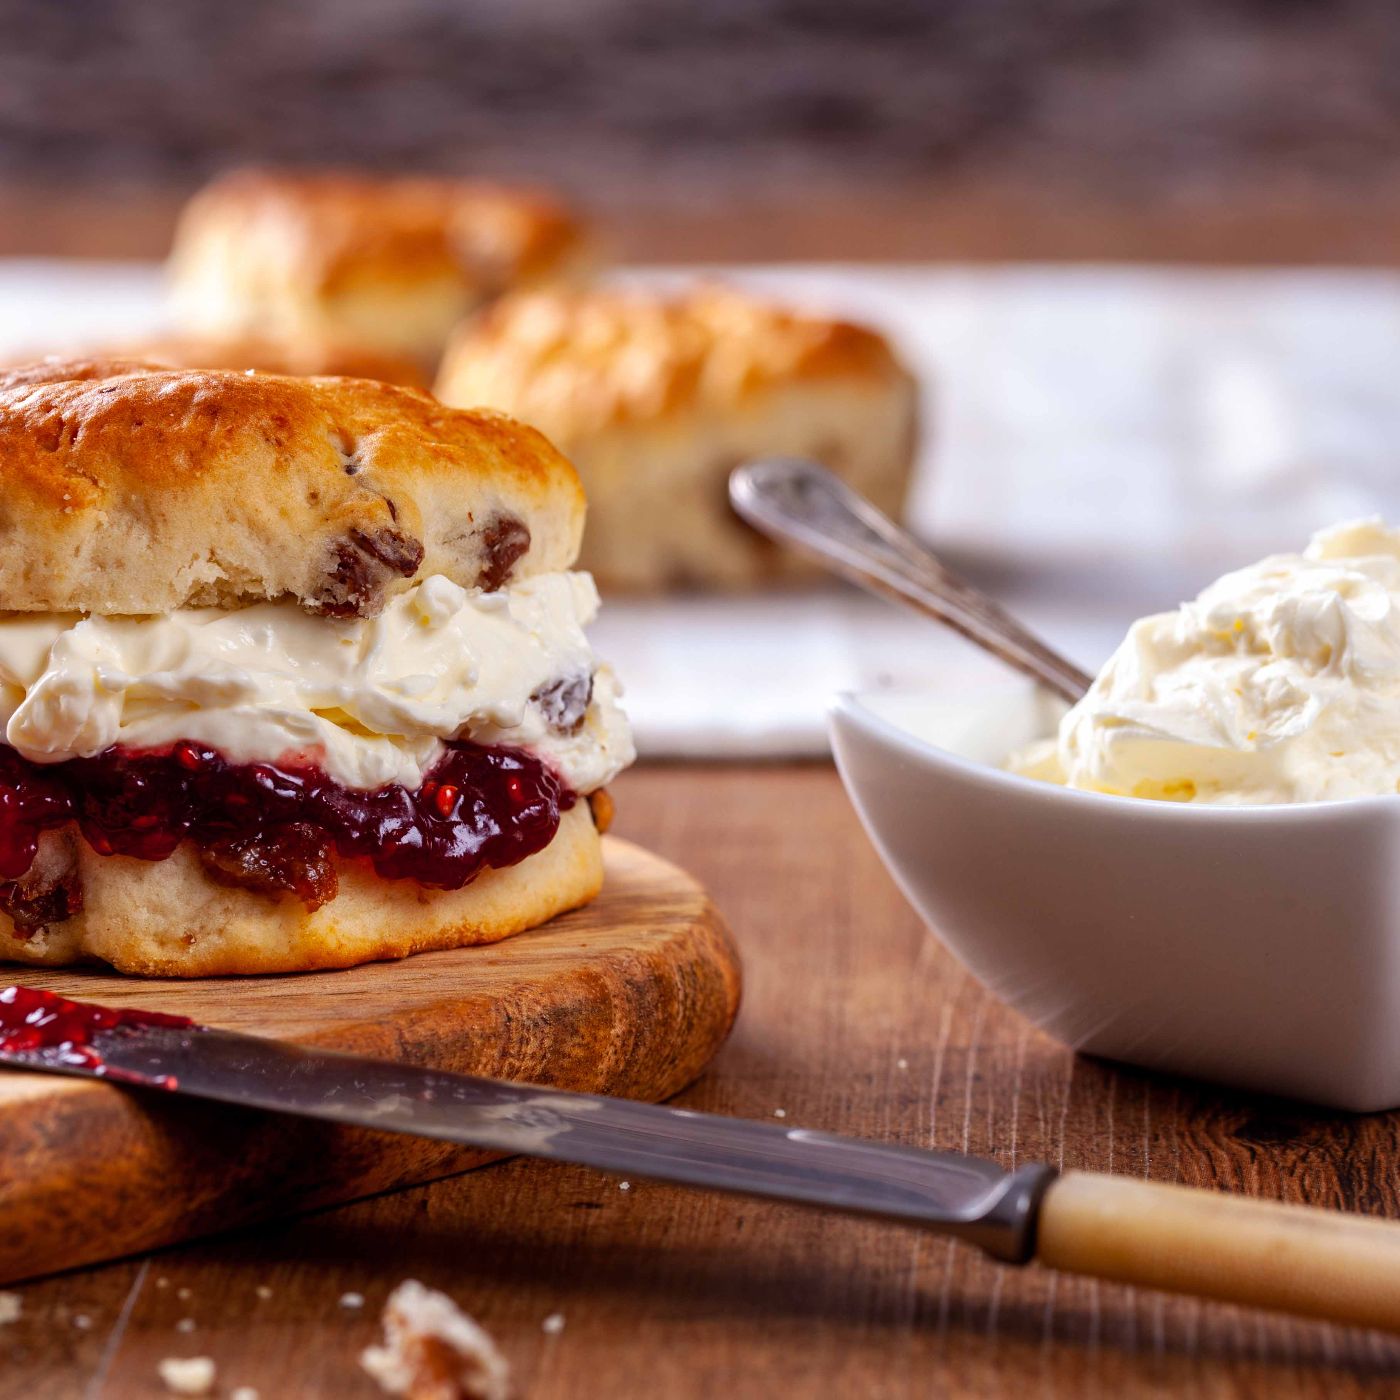 Scones-with-Strawberry-Jam-and-Clotted-Cream-959875000_5449x3633 square.jpg